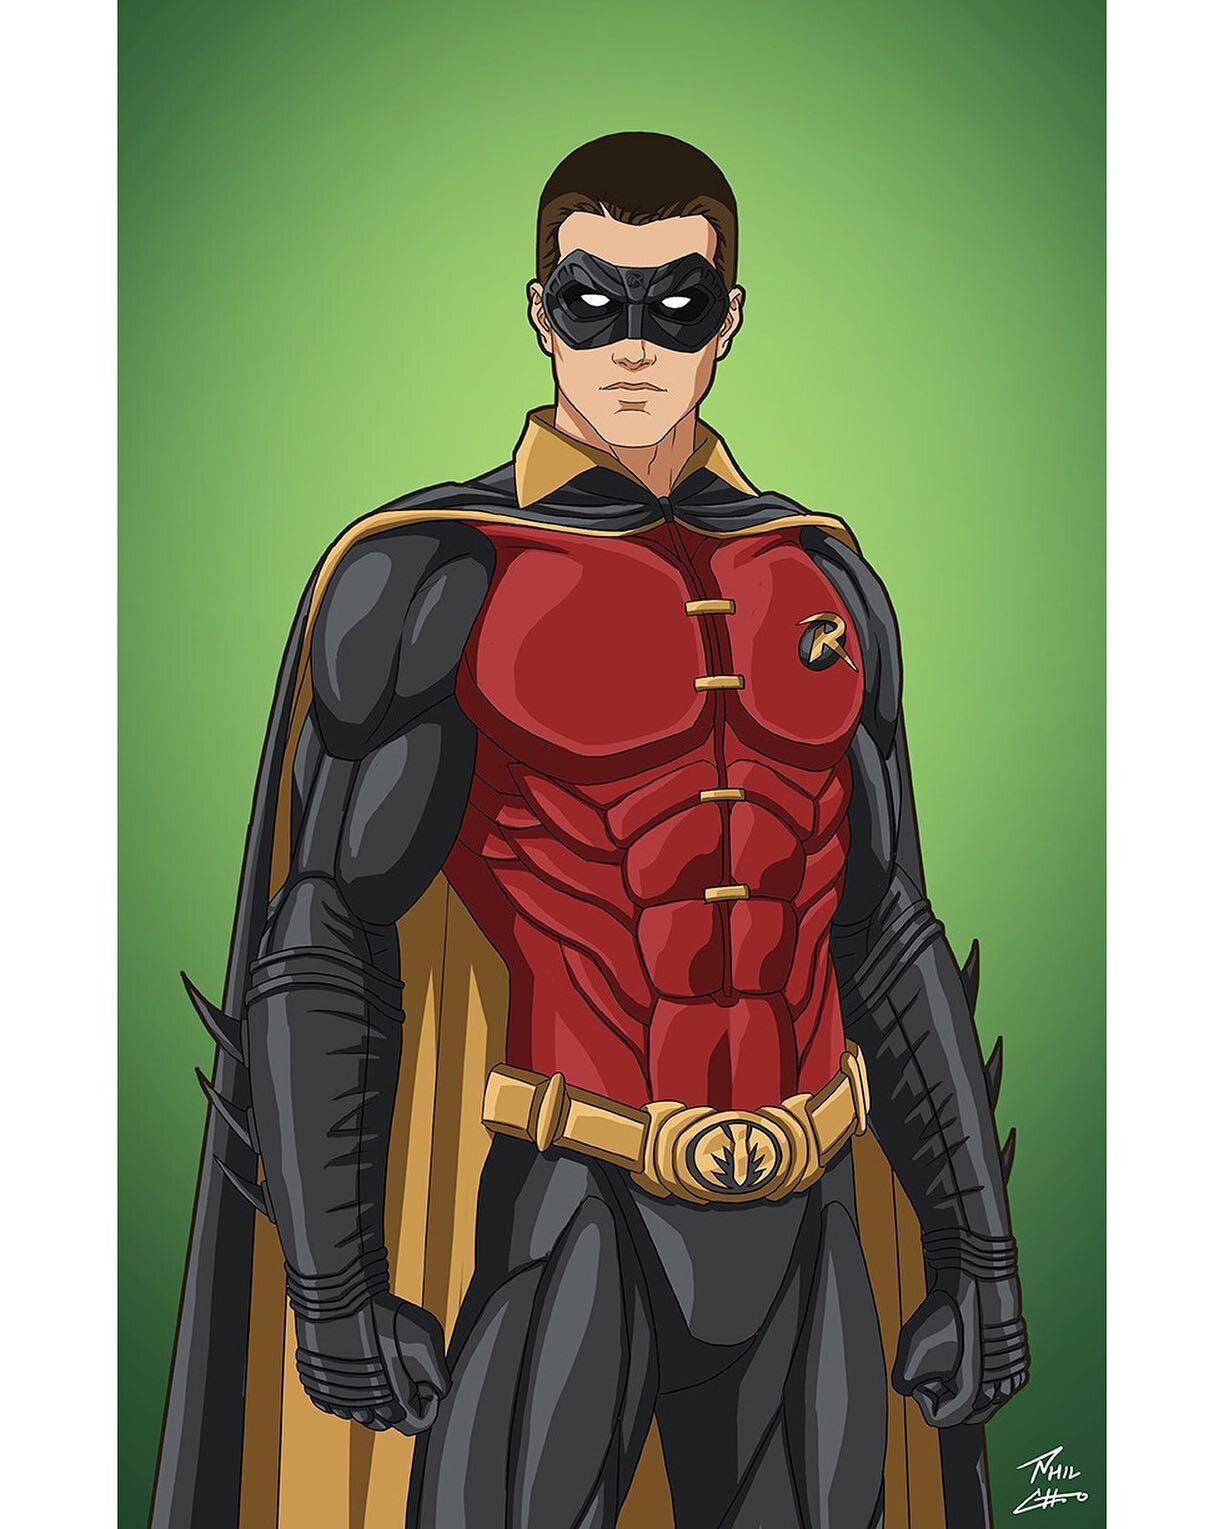 Robin (Chris O'Donnell) from Joel Schumacher's &quot;Batman Forever&quot; in an alternate color scheme (red and black)
Character belongs to DC Comics.
Art by Phil Cho.

#robin #chrisodonnell #redesign #dccomics #dickgrayson